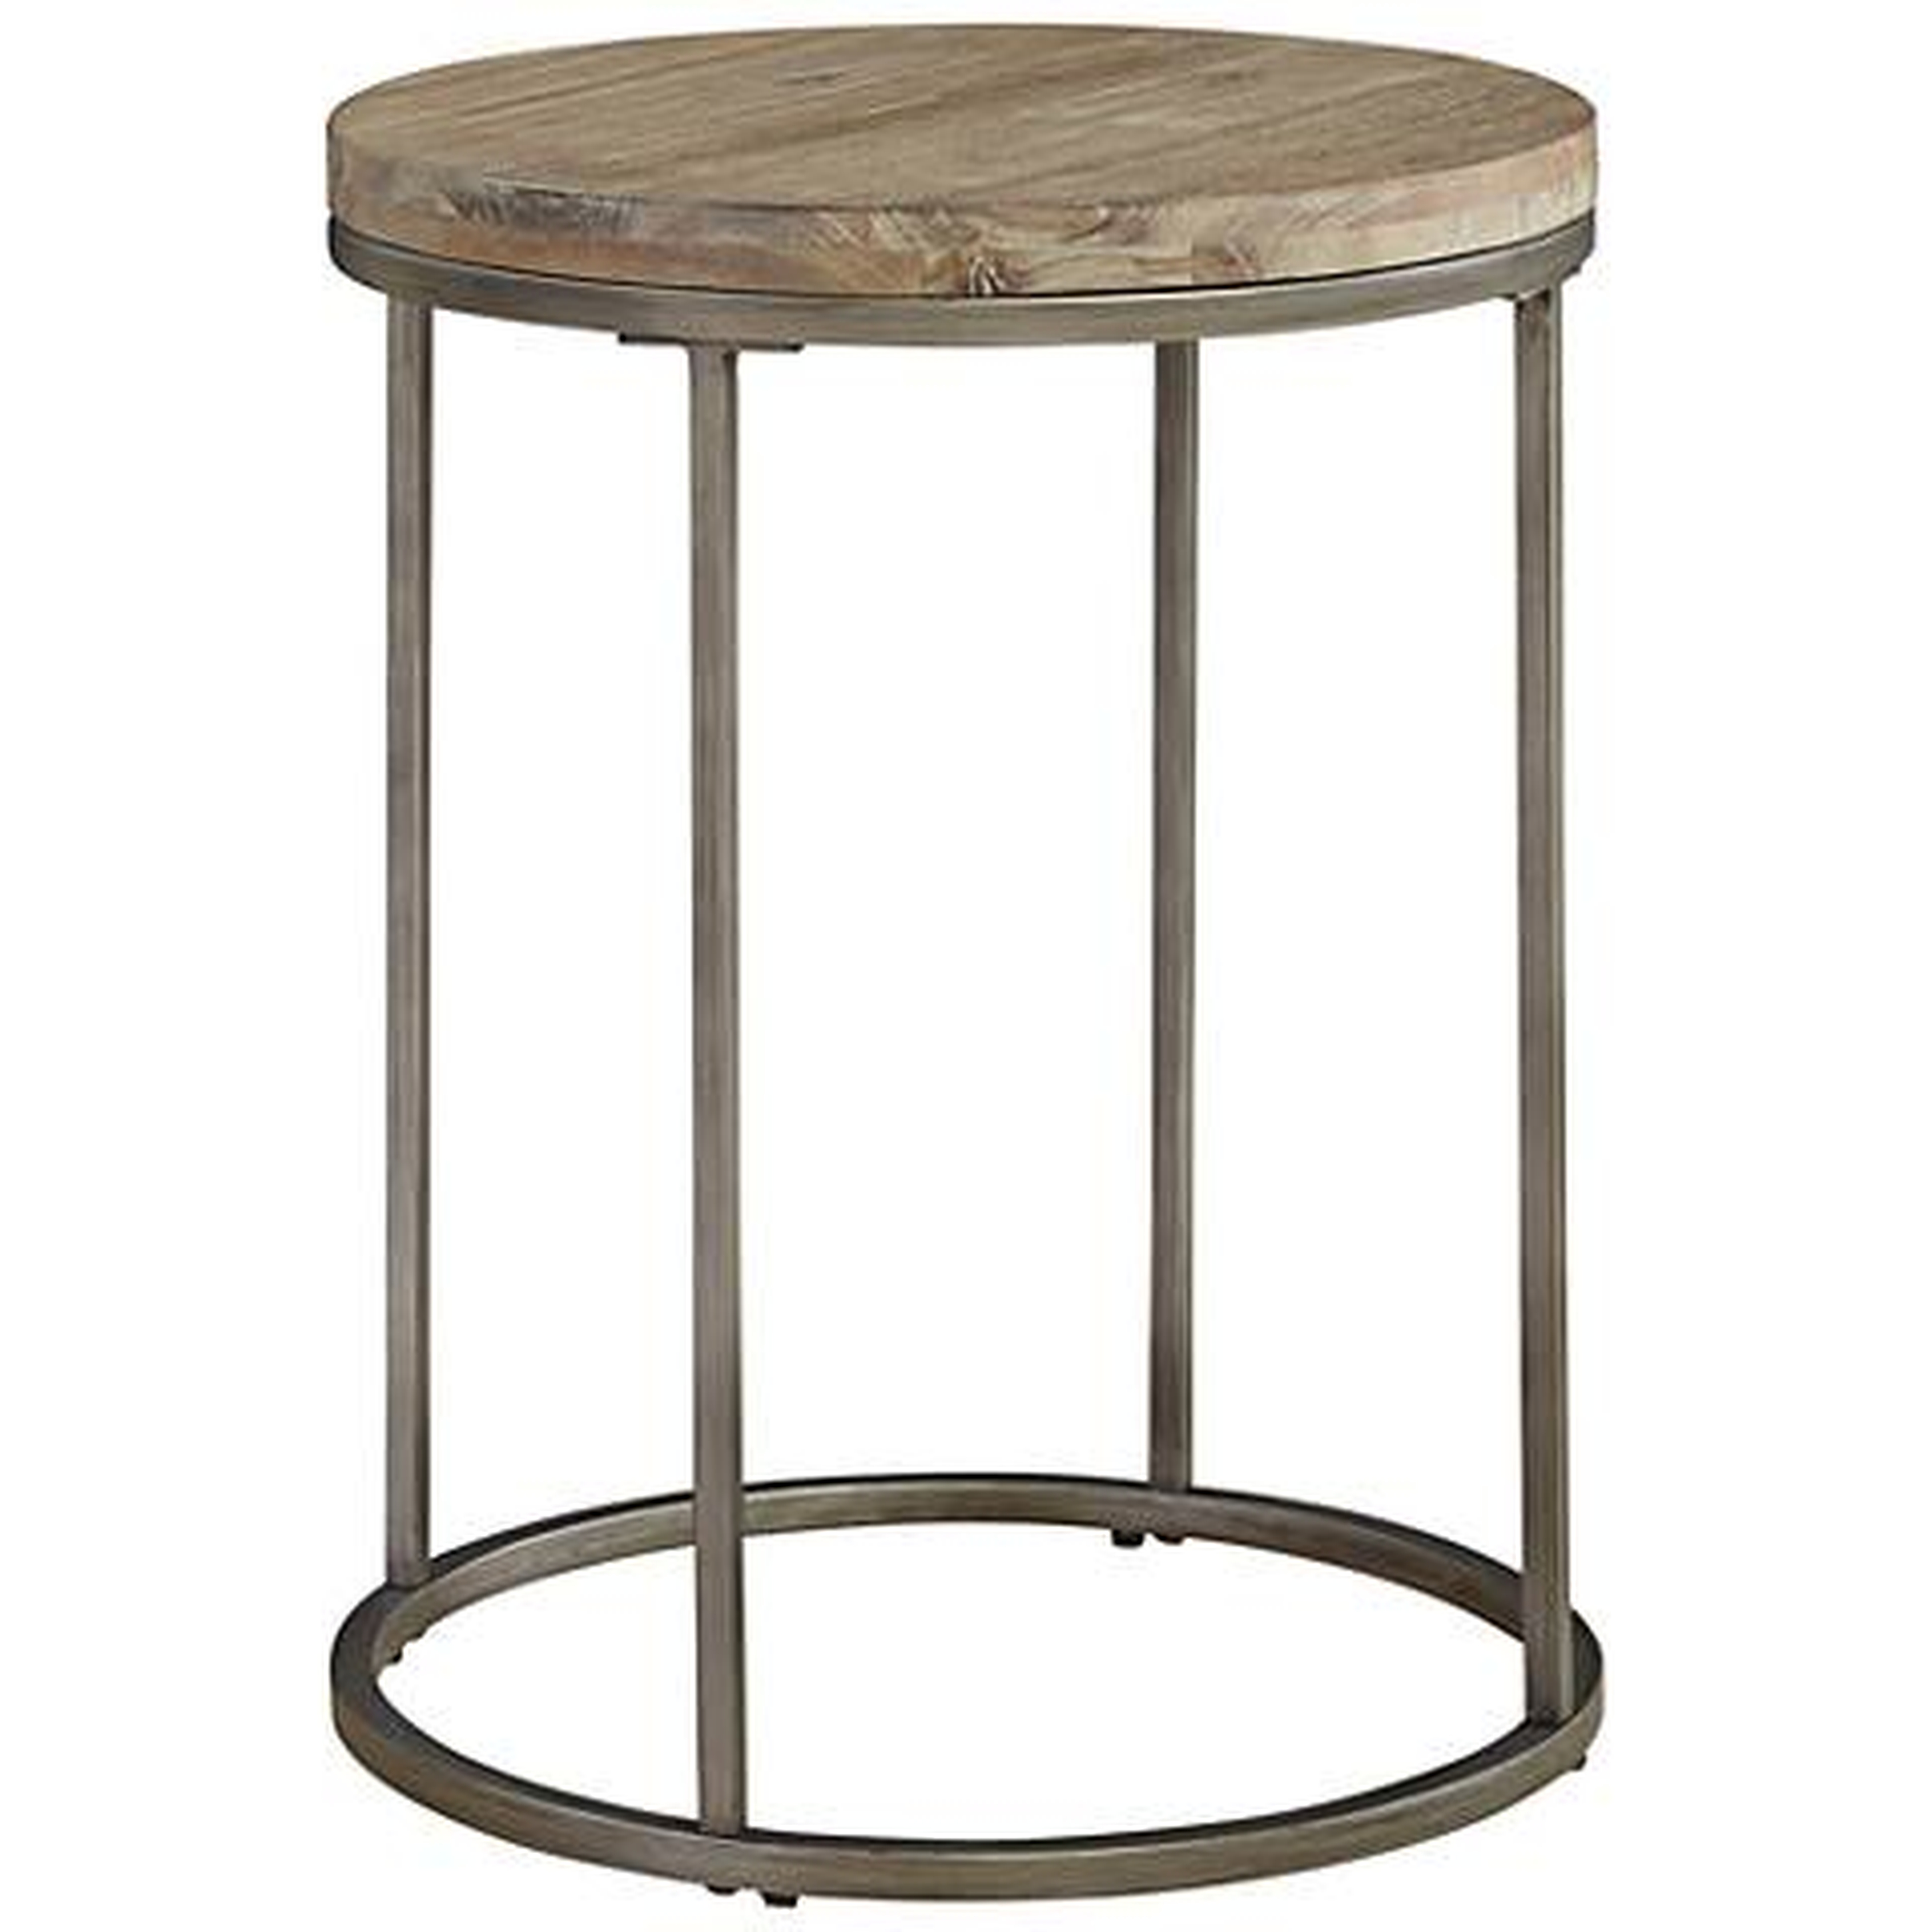 Alana Steel and Acacia Wood Top Round End Table - Lamps Plus